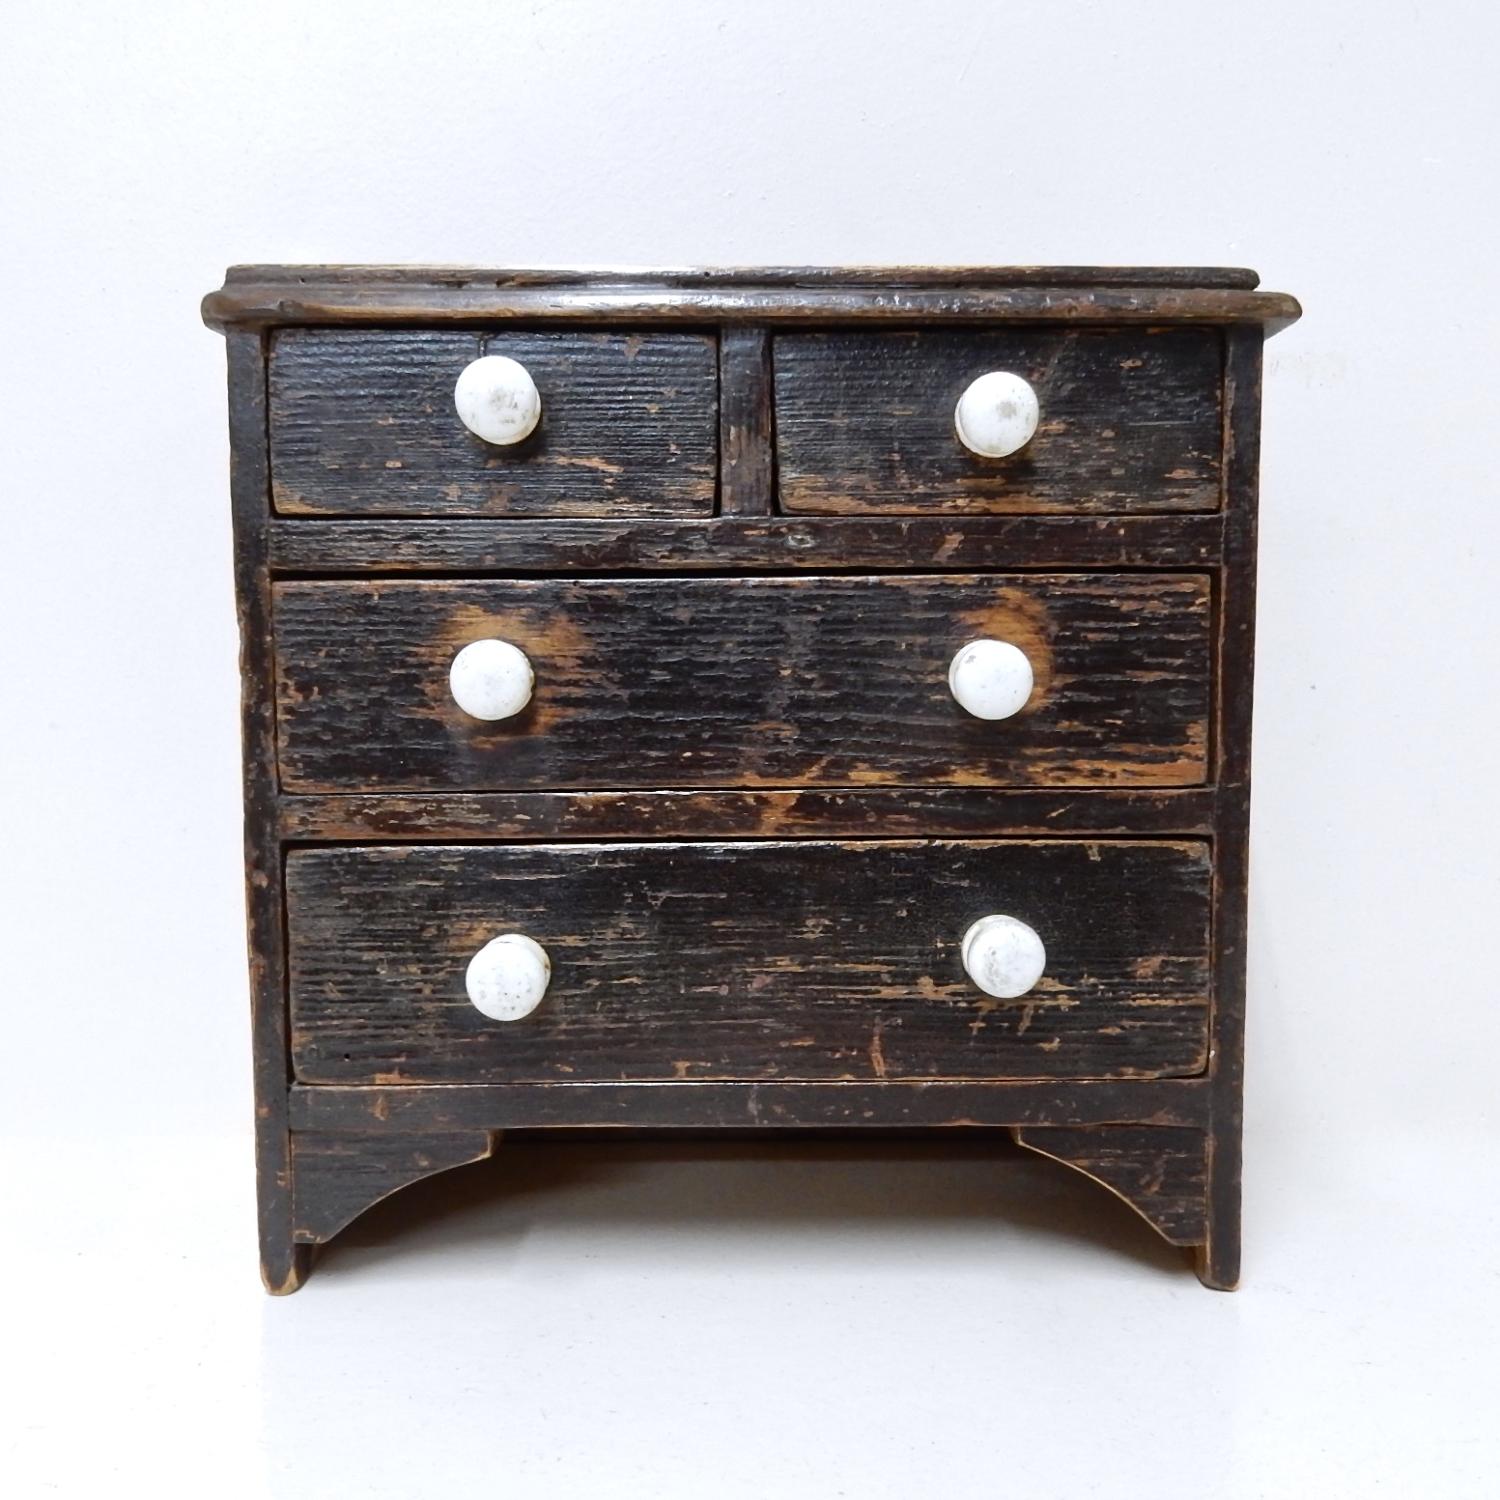 Miniature Chest of Drawers